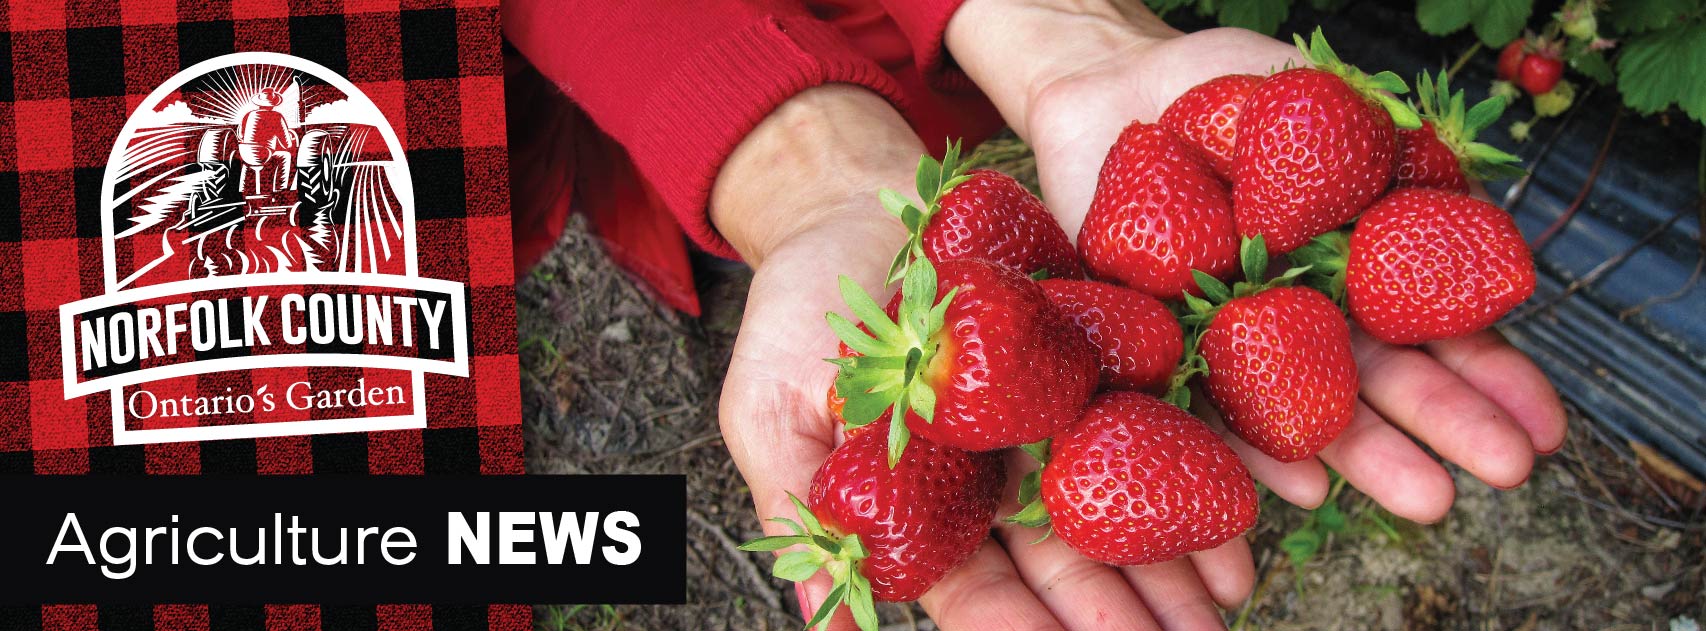 Agriculture News Strawberries